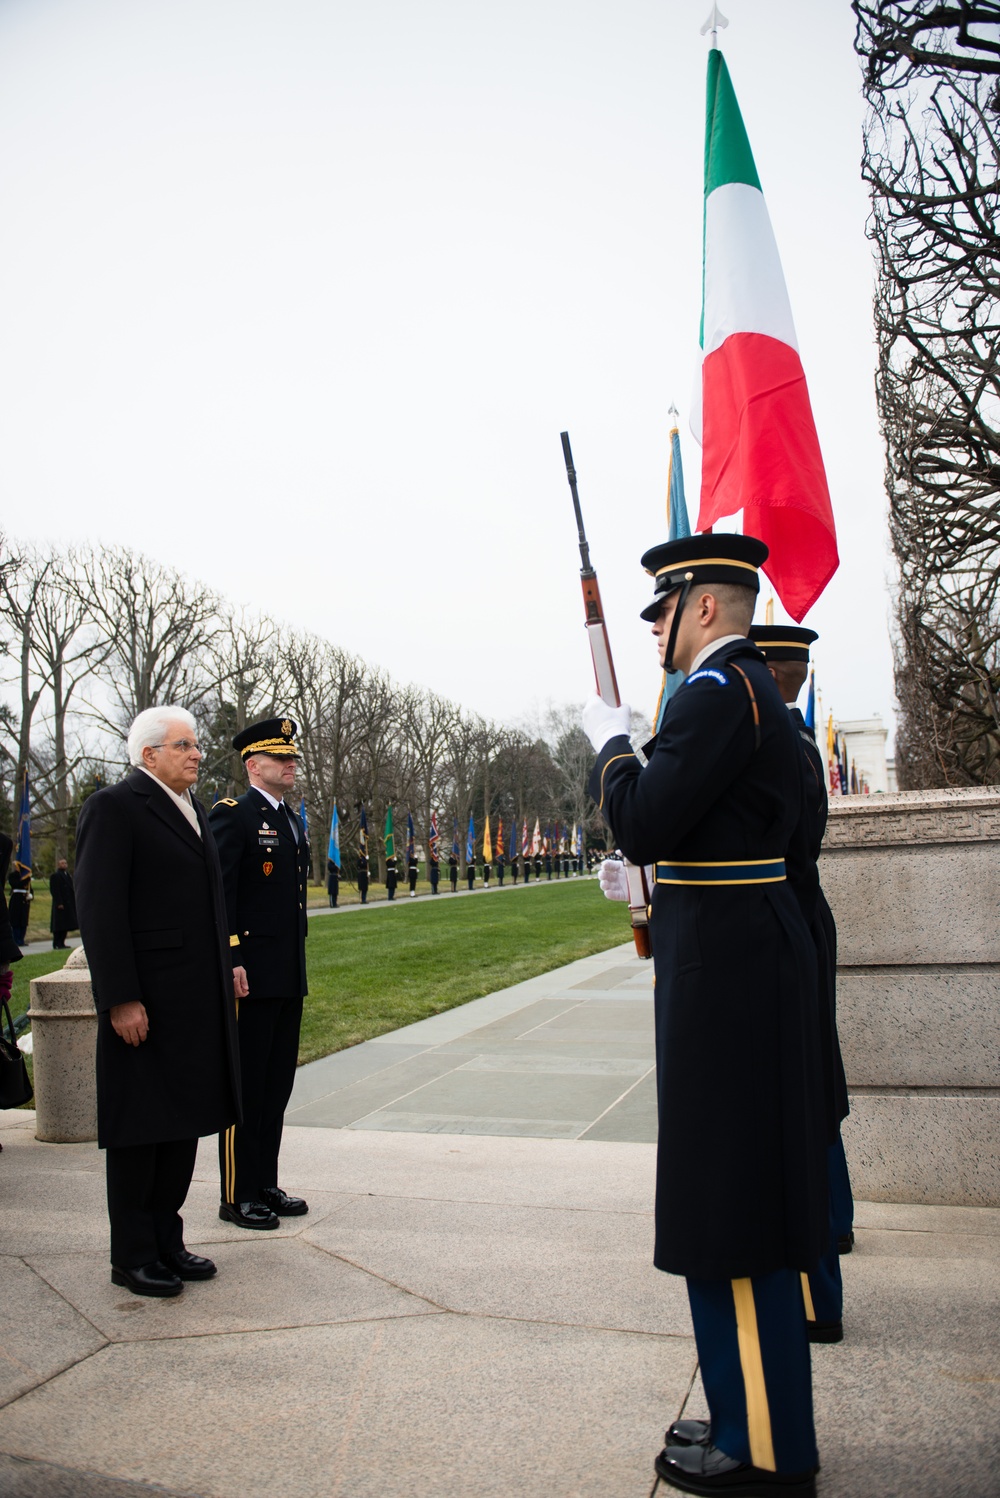 President of Italy lays a wreath at the Tomb of the Unknown Soldier in Arlington National Cemetery